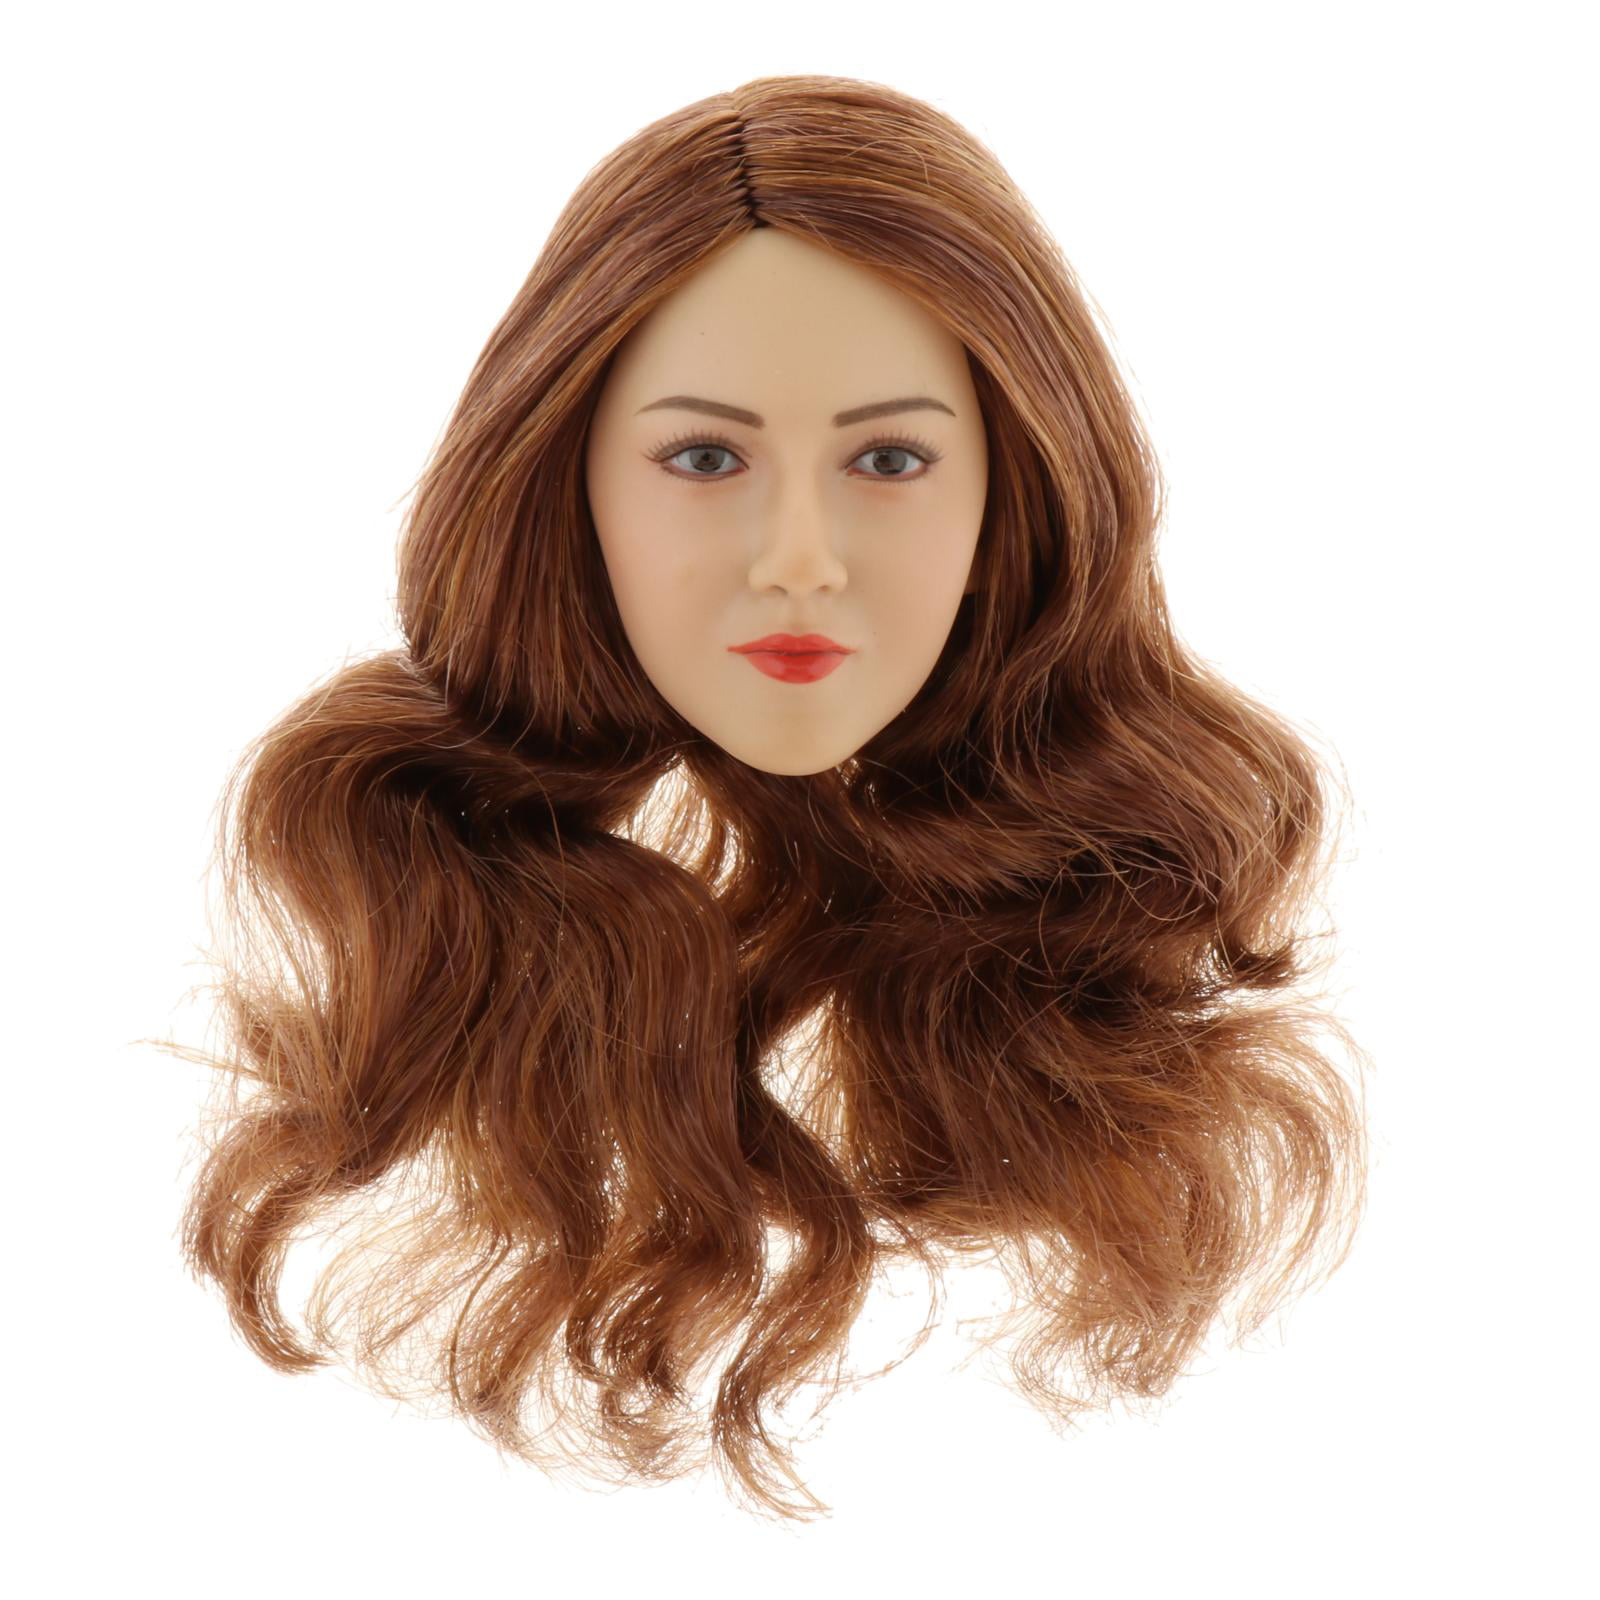 1:6 Customize Male/ Female  Planted HairHead Sculpt Toy Fit 12'' Body Toy Gift 